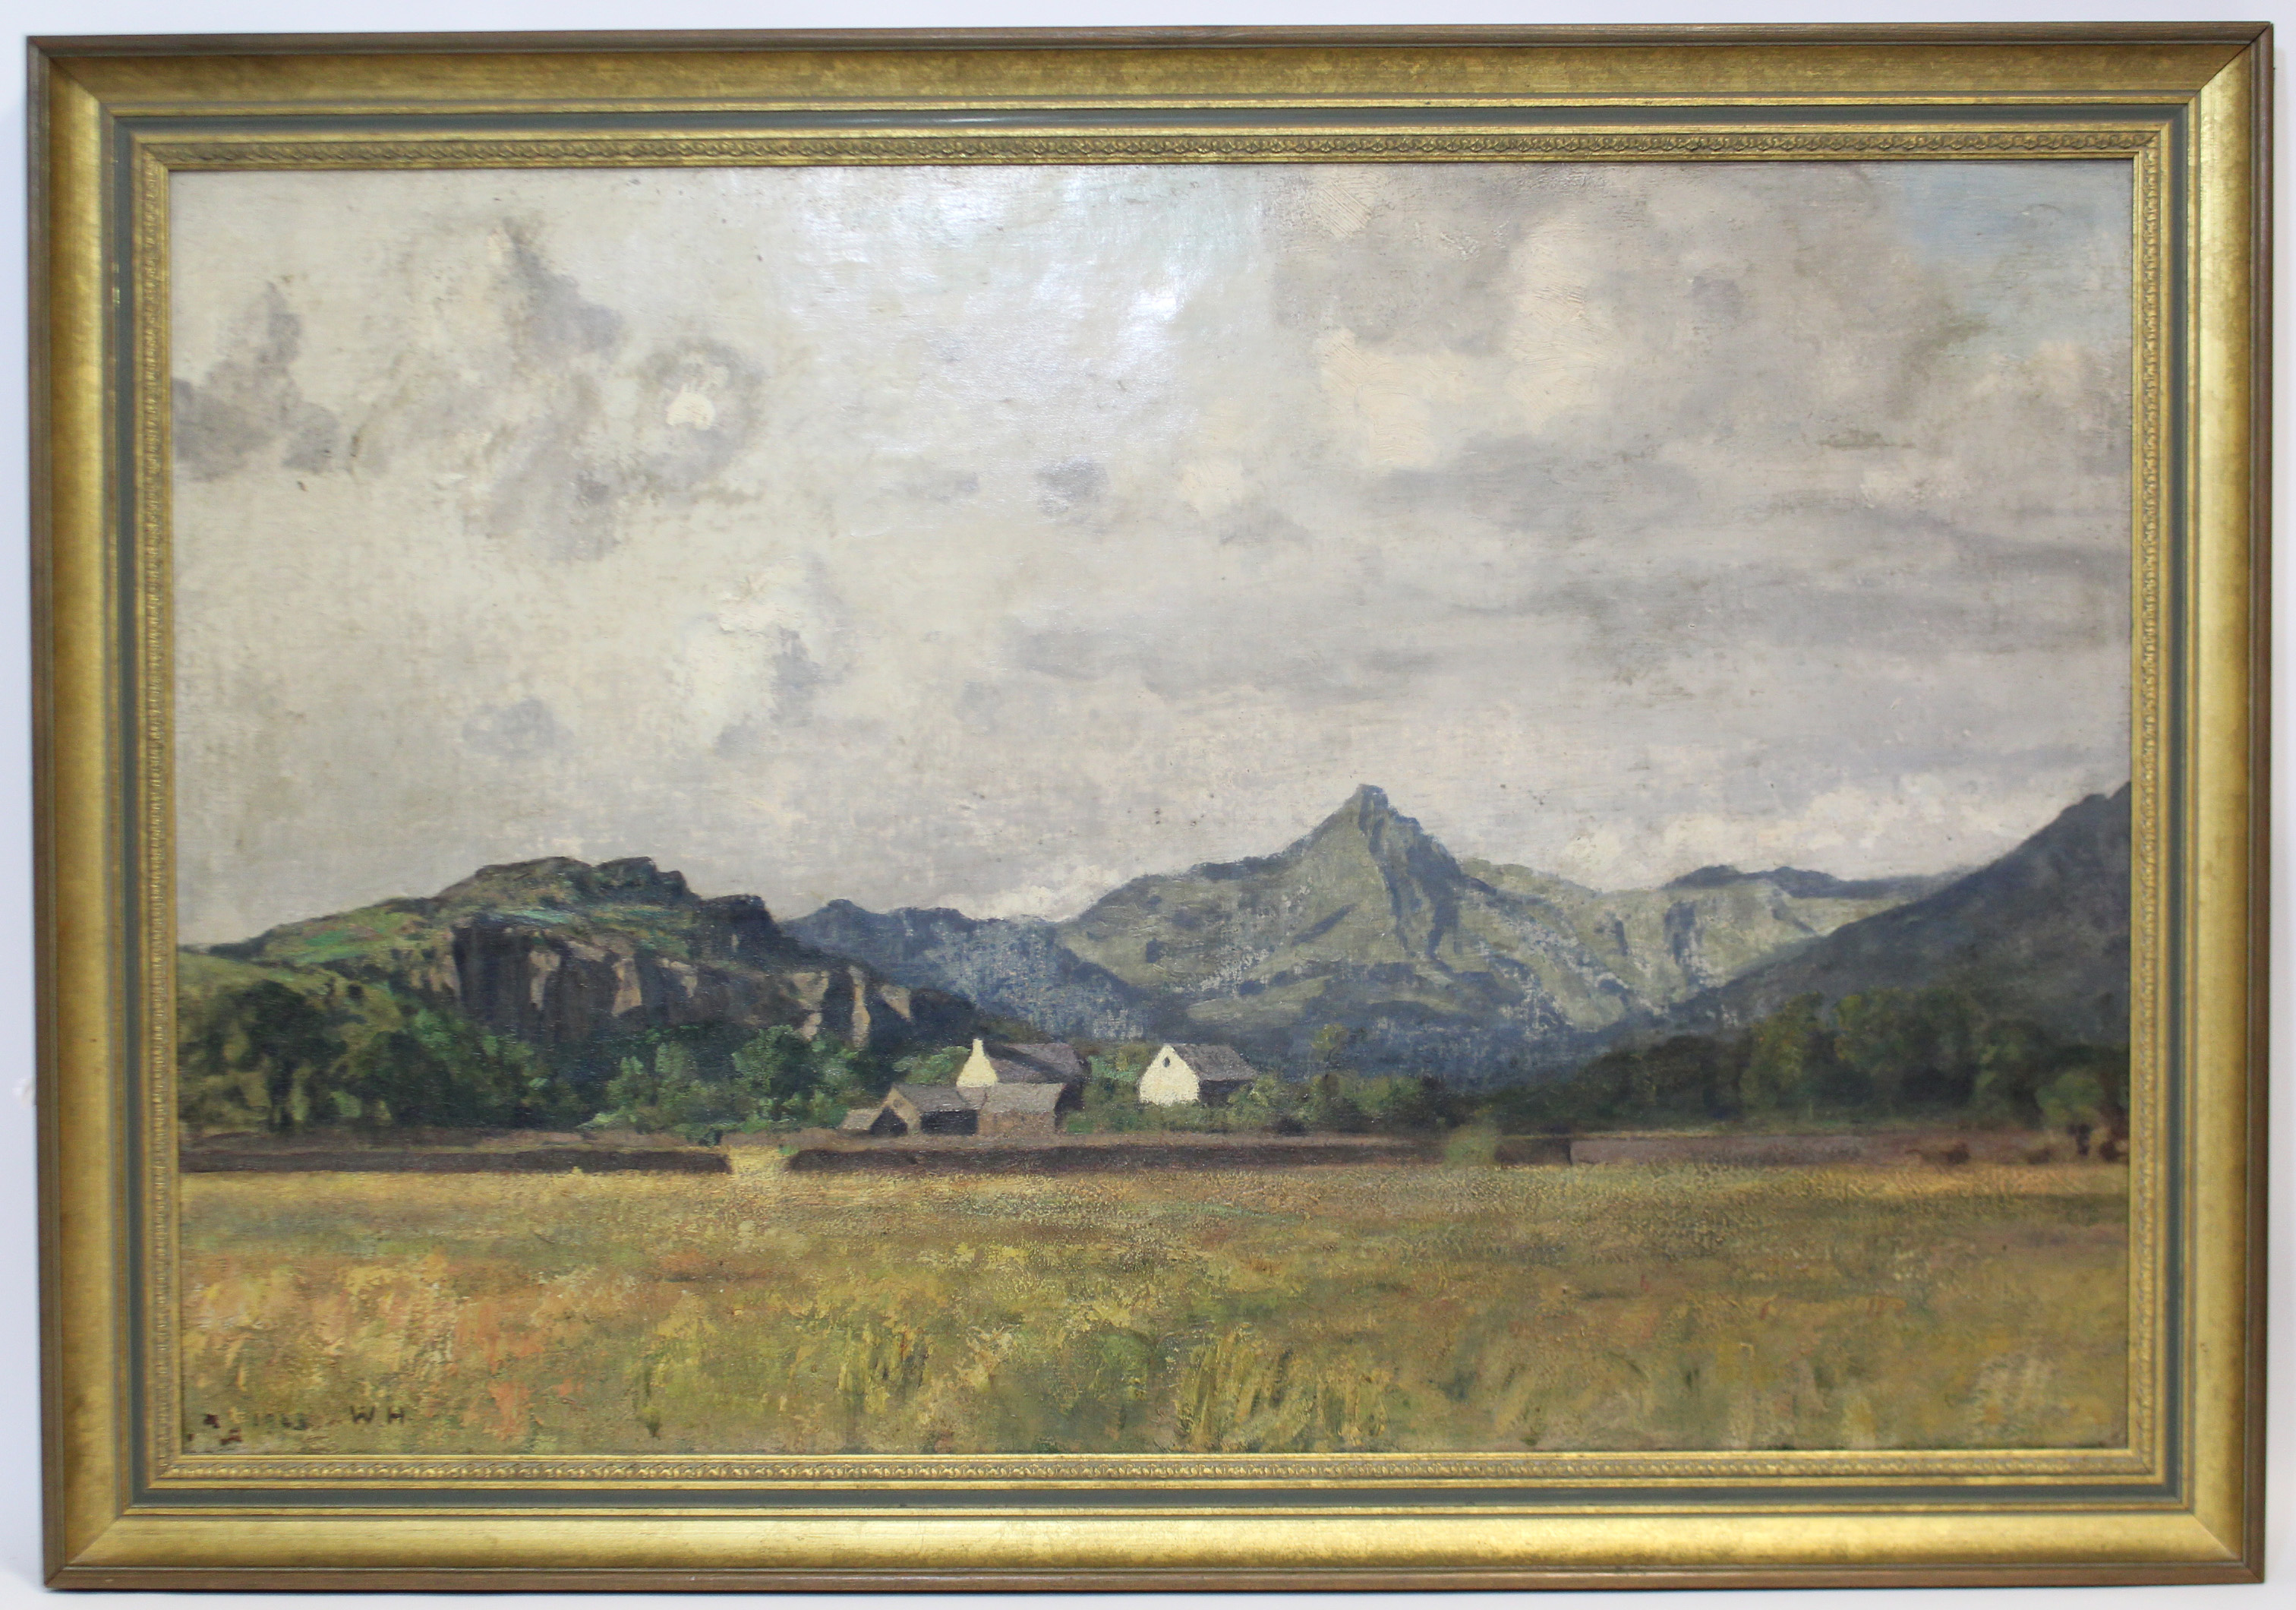 ENGLISH SCHOOL, 19th century. An extensive mountainous landscape with farm buildings to the fore.